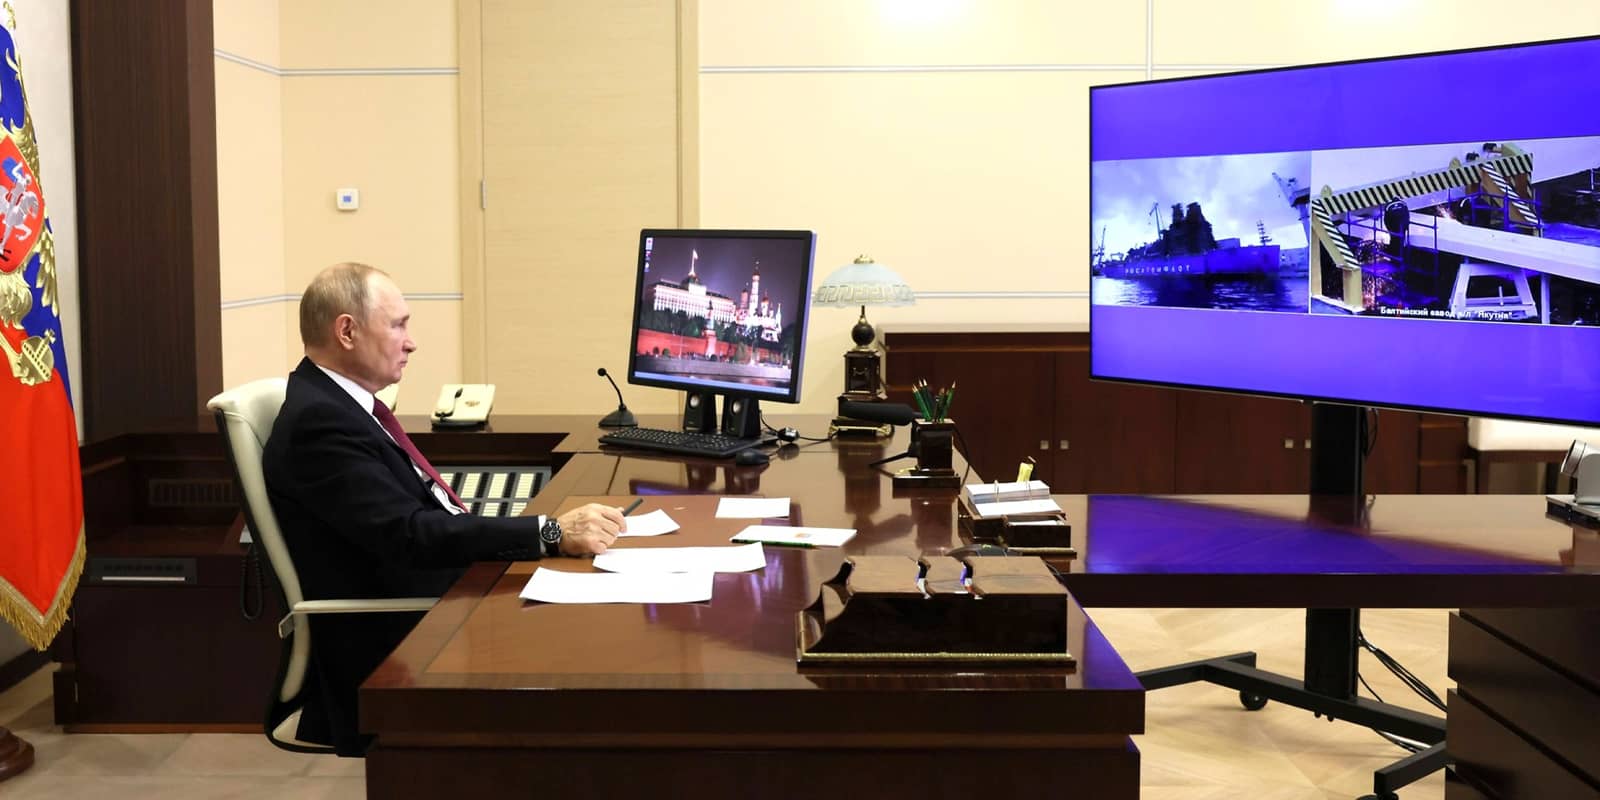 Russian President Vladimir Putin watches the launching of the nuclear-powered icebreakers Ural and Yakutia via video link from the presidential residence of Novo-Ogaryovo, November 22, 2022 in Moscow, Russia.